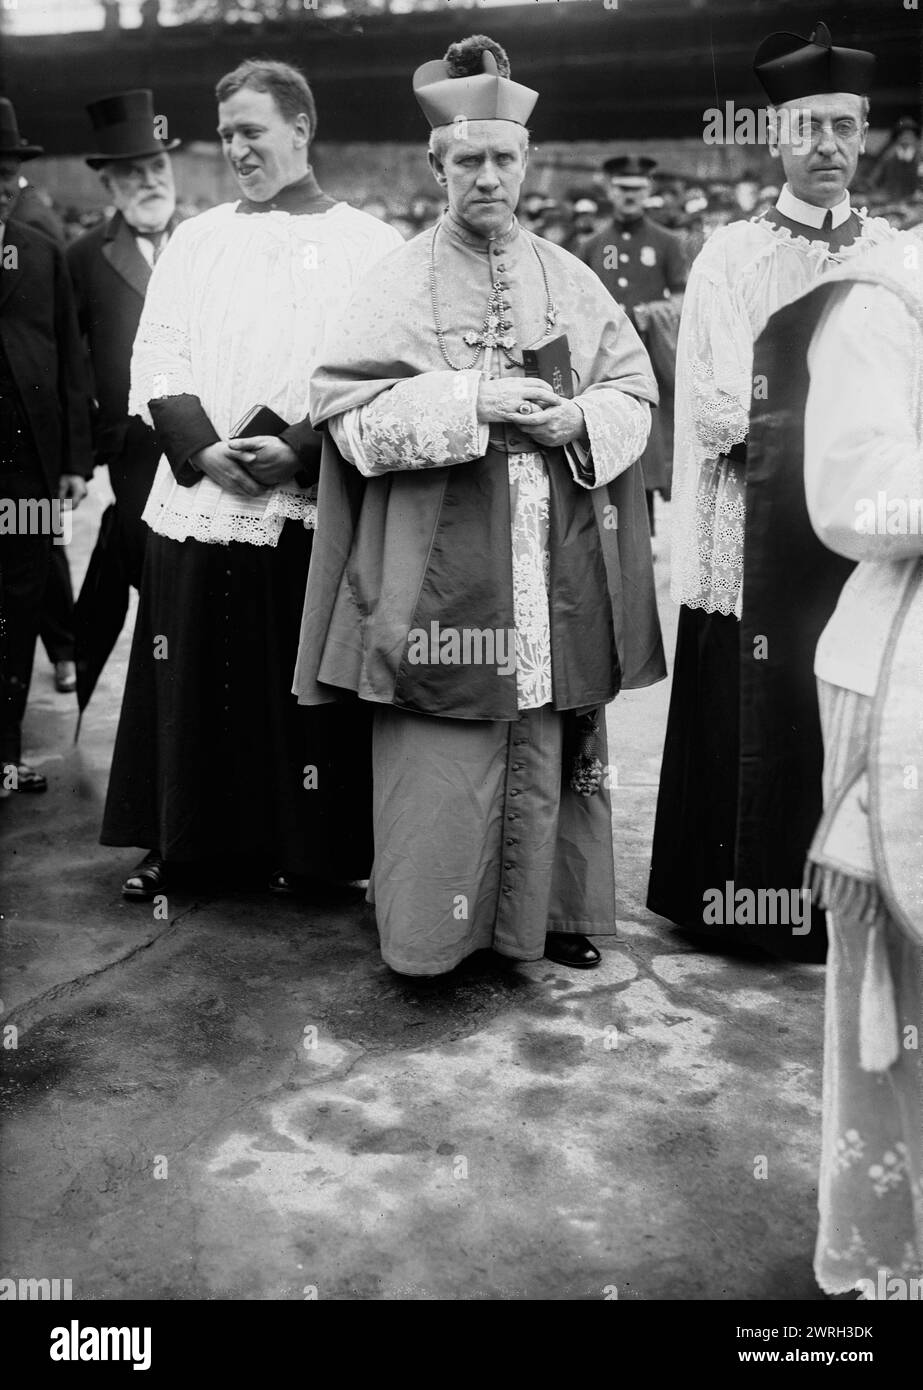 Rt. Rev. P.J. Hayes, 30 May 1918. Patrick Joseph Hayes (1867-1938), American cardinal of the Roman Catholic Church who was Vicar Apostolic of Military USA. He is attending the military mass at the Battery, New York City, held in May 1918 during World War I. Stock Photo